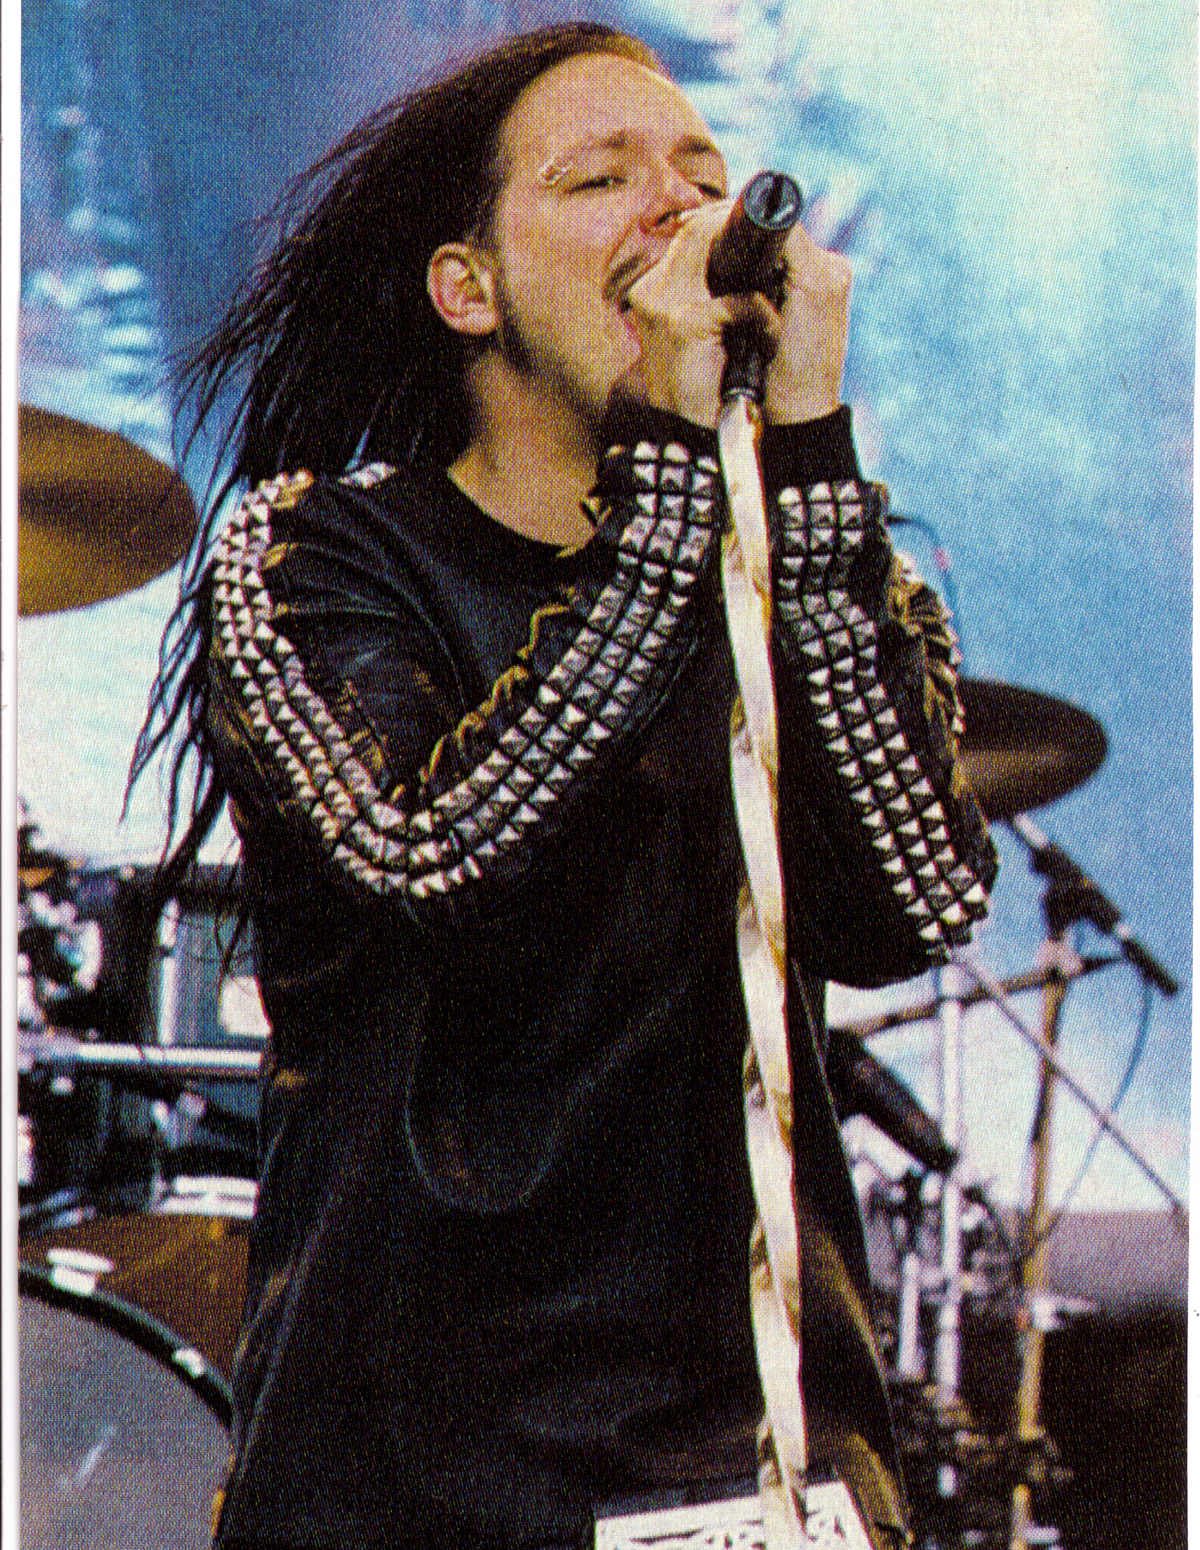 Cameron Reese on "KORN gets some flack sometimes but Jonathan Davis did turn out iconic looks throughout the years..as an adidas I highly approve / Twitter